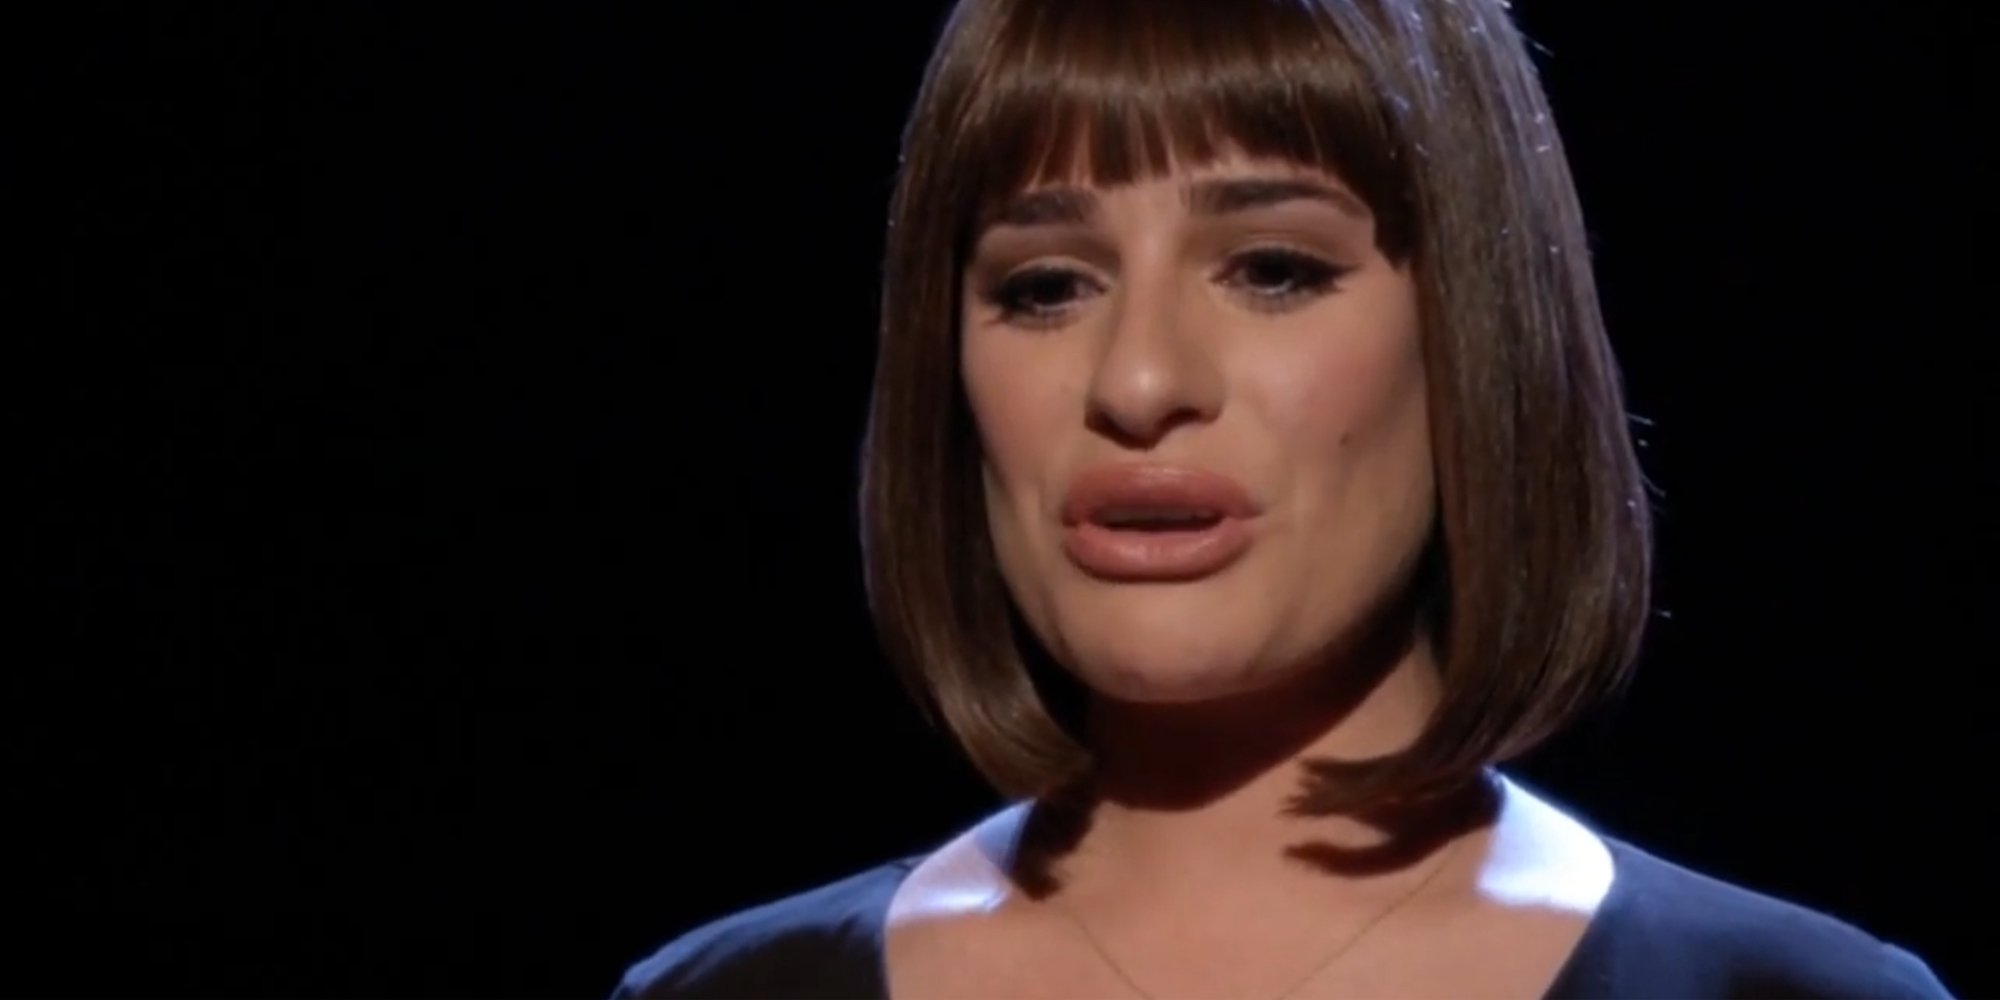 Lea Michele in Glee episode titled "Opening Night."